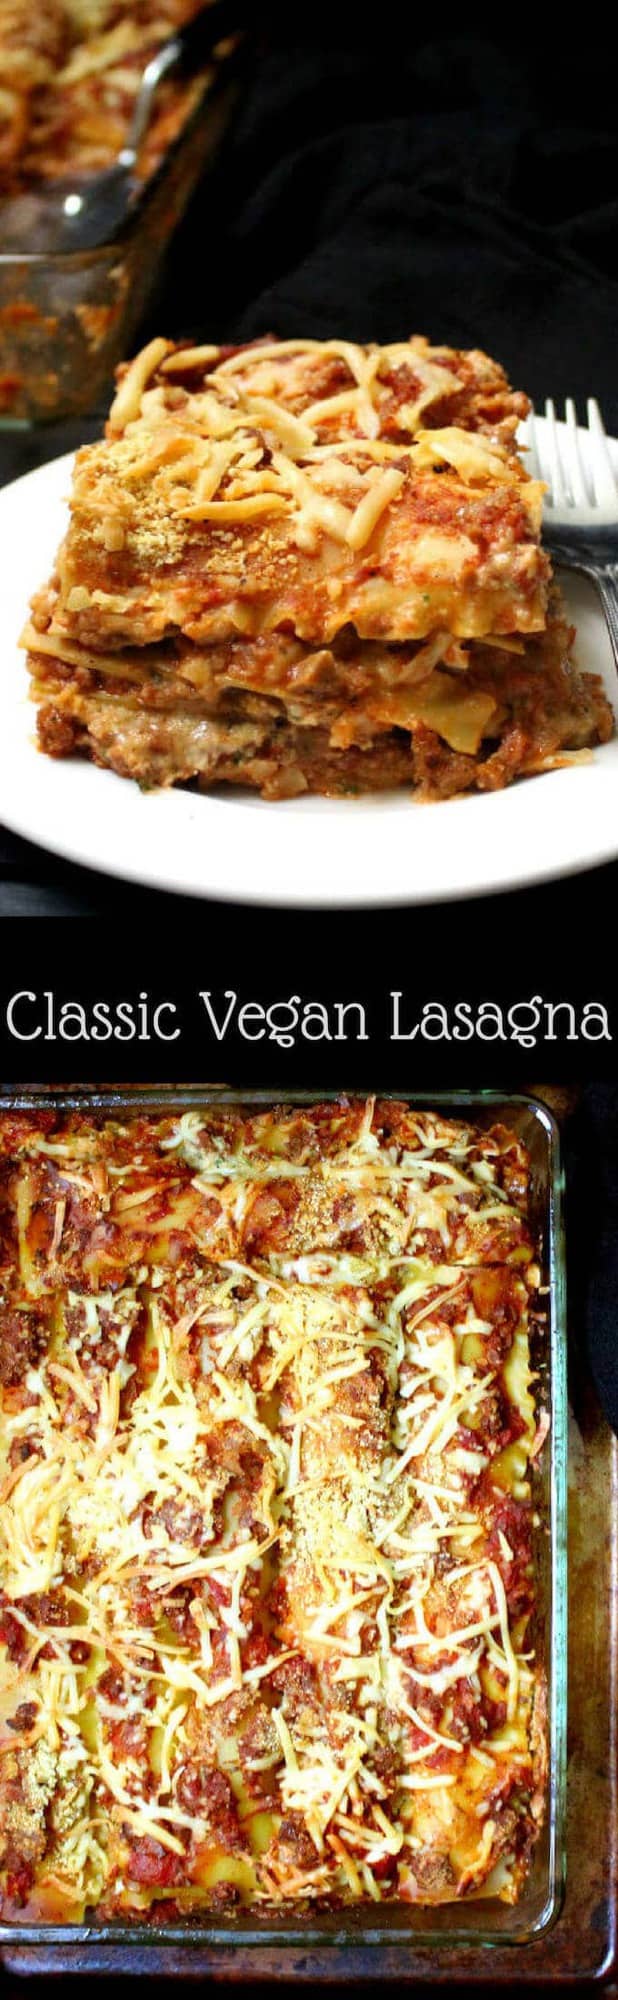 A classic vegan lasagna recipe with a meatfree "meat" sauce and vegan ricotta, parmesan and mozzarella cheeses. Perfect comfort food for a crowd or for a cozy dinner in with family or friends. #vegan #lasagna #thanksgiving #recipes #holidays #italianfood #pasta HolyCowVegan.net